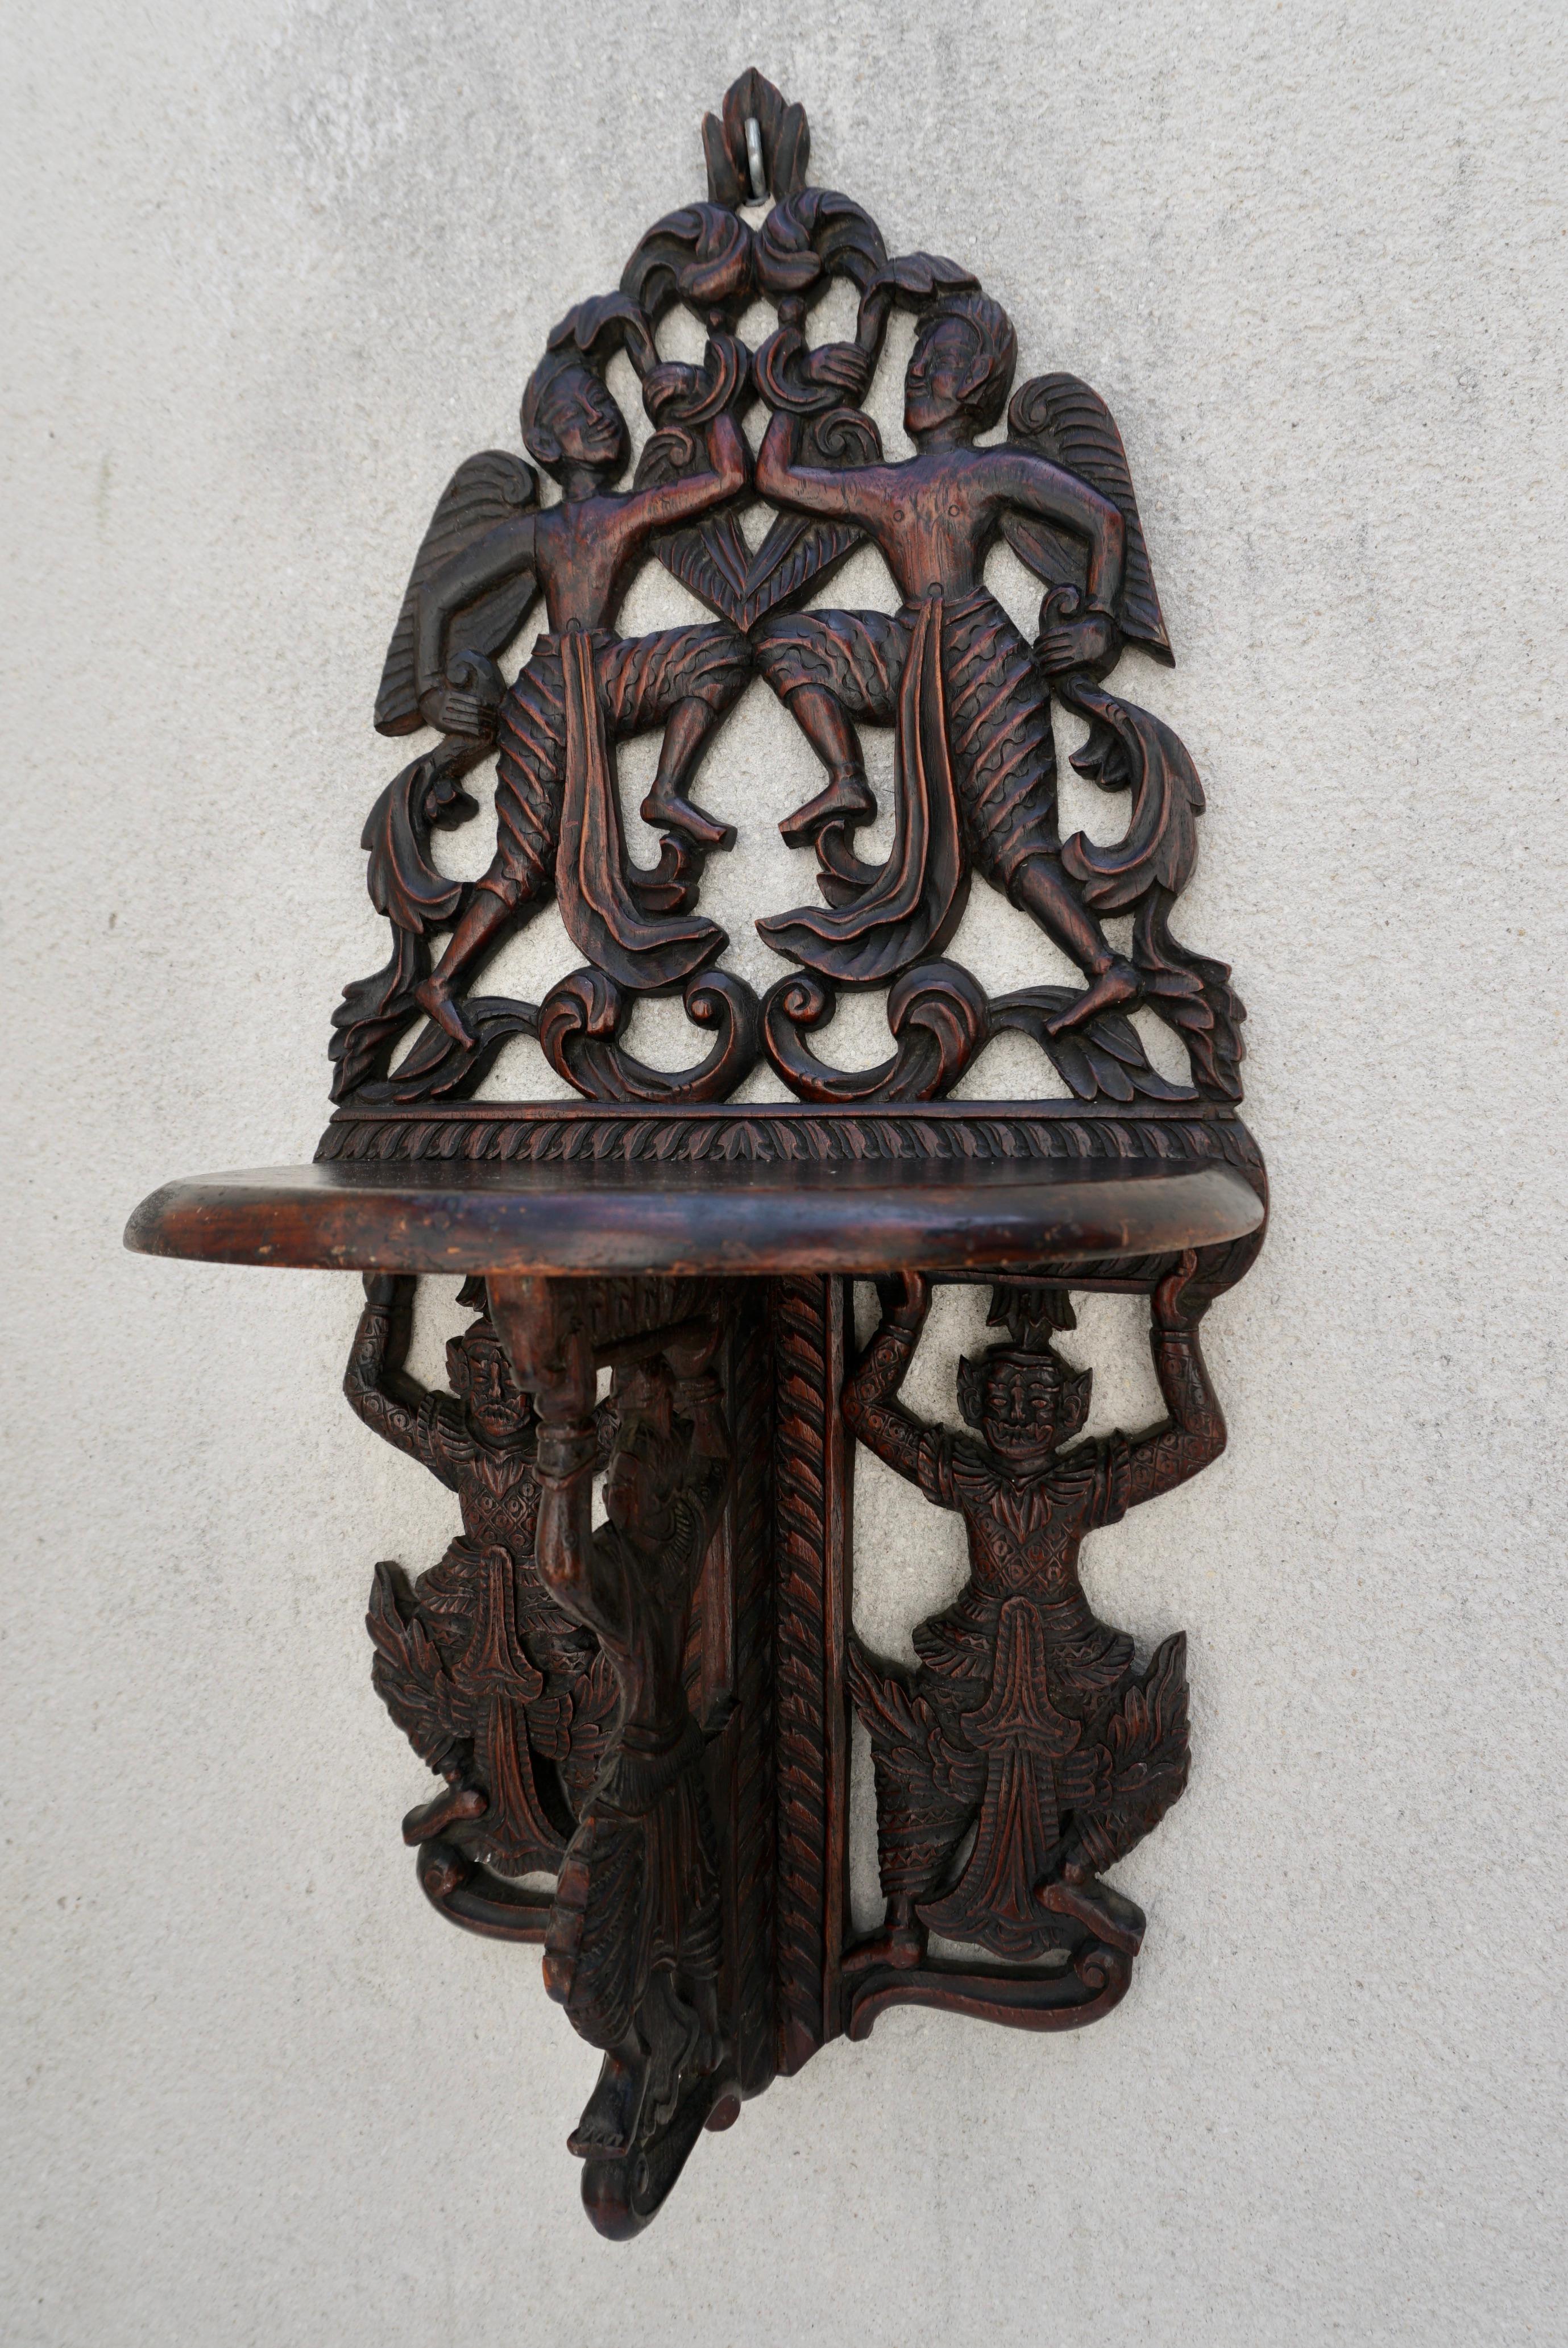 Pair Indonesian carved figural wall console brackets.

Pair Indonesian carved Figural wall brackets, carved with winged figures and dancing demons, with hinged shelf and bracket.
 
 Dimensions: 28 x 14 x 11 in.
 
 Condition: Some age related wear